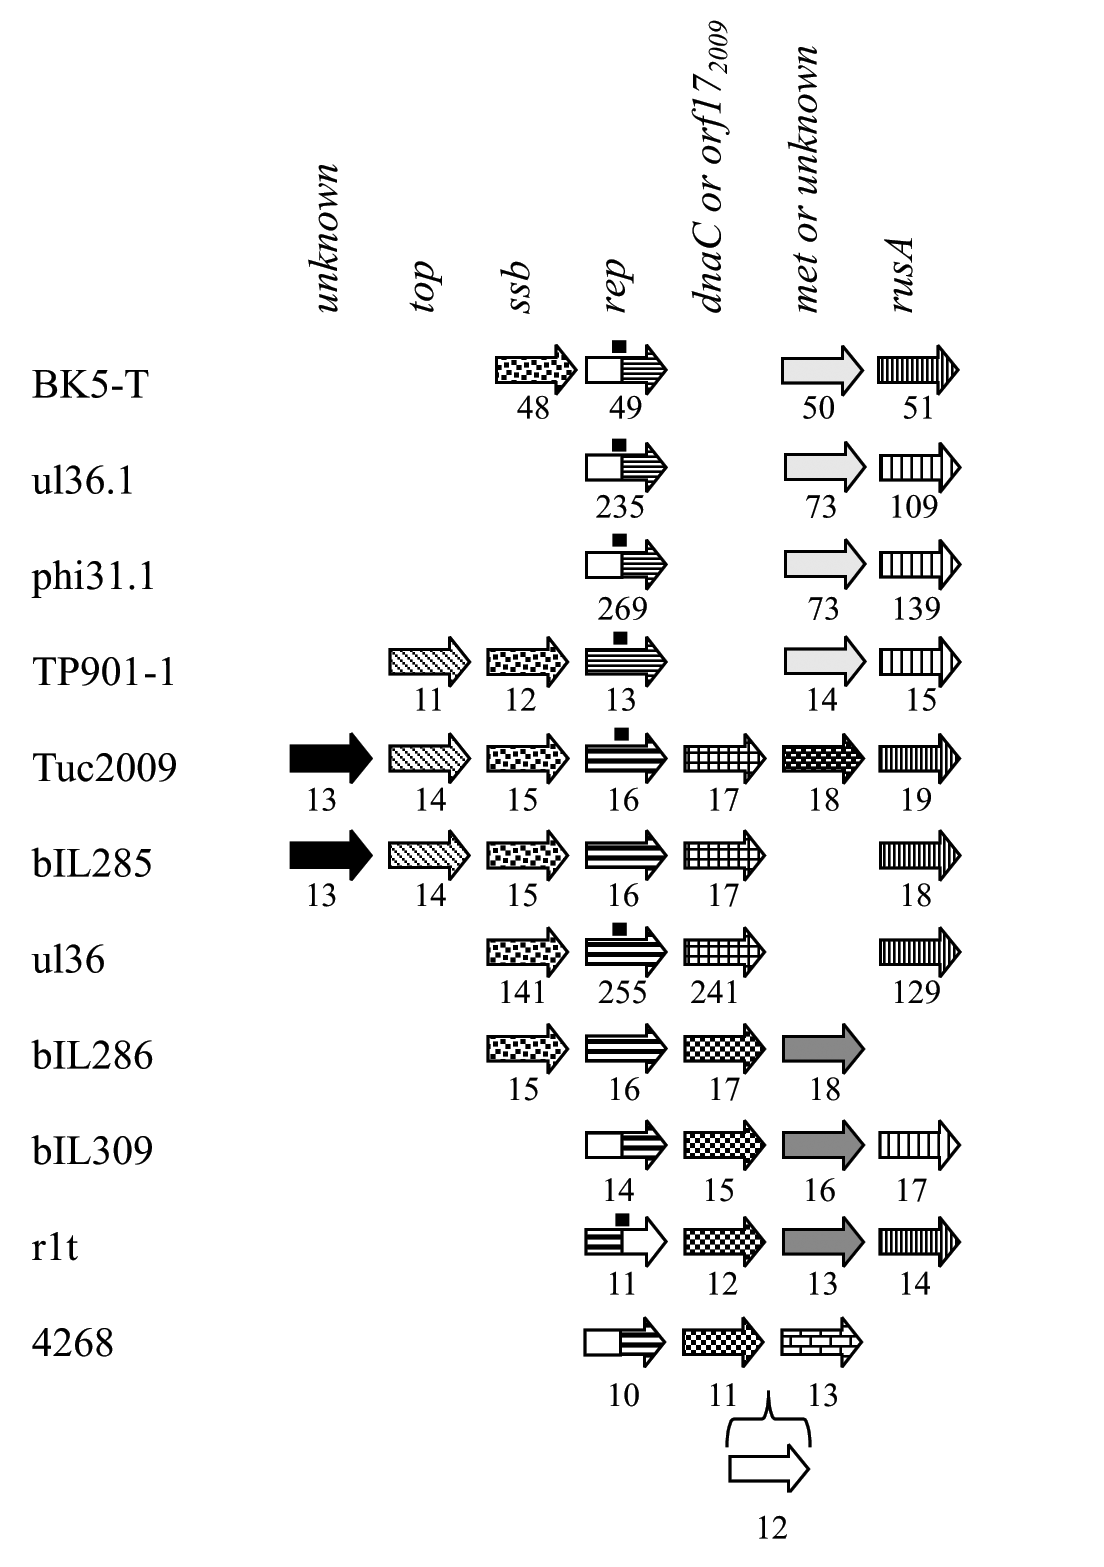 Figure 36-5: Genetic organization of the replication region of P335 phages. Identified and putative functions are indicated at the top of the figure and genes are aligned according to this. Putative topoisomerases: top, single-stranded binding proteins: ssb, replication initiation proteins: rep, homologues to ORF17 of Tuc2009: orf17(2009), DnaC homologous proteins: dnaC, methylase: met, putative Holliday junction resolvases: rusA. Genes encoding similar proteins are shown as arrows with identical pattern. No similarity to other phage proteins: white, similar proteins with no identified function: black or gray. Small black boxes indicate location of origin of replication identified by experiments.